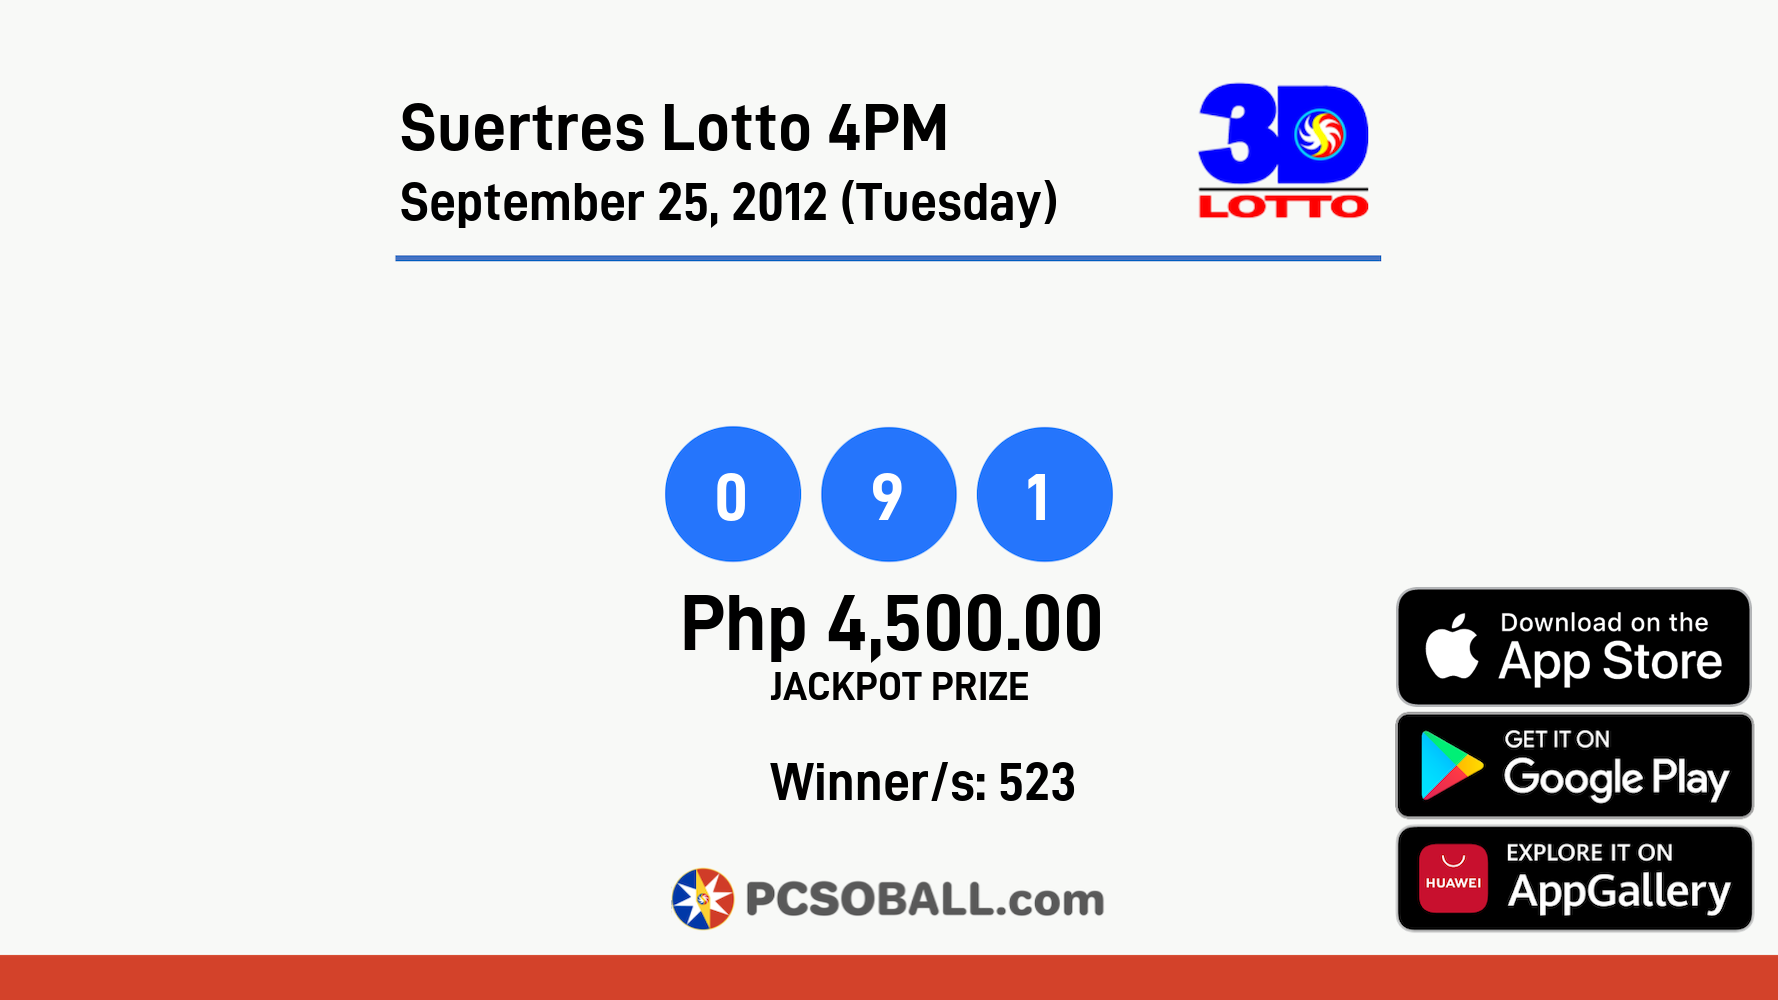 Suertres Lotto 4PM September 25, 2012 (Tuesday) Result